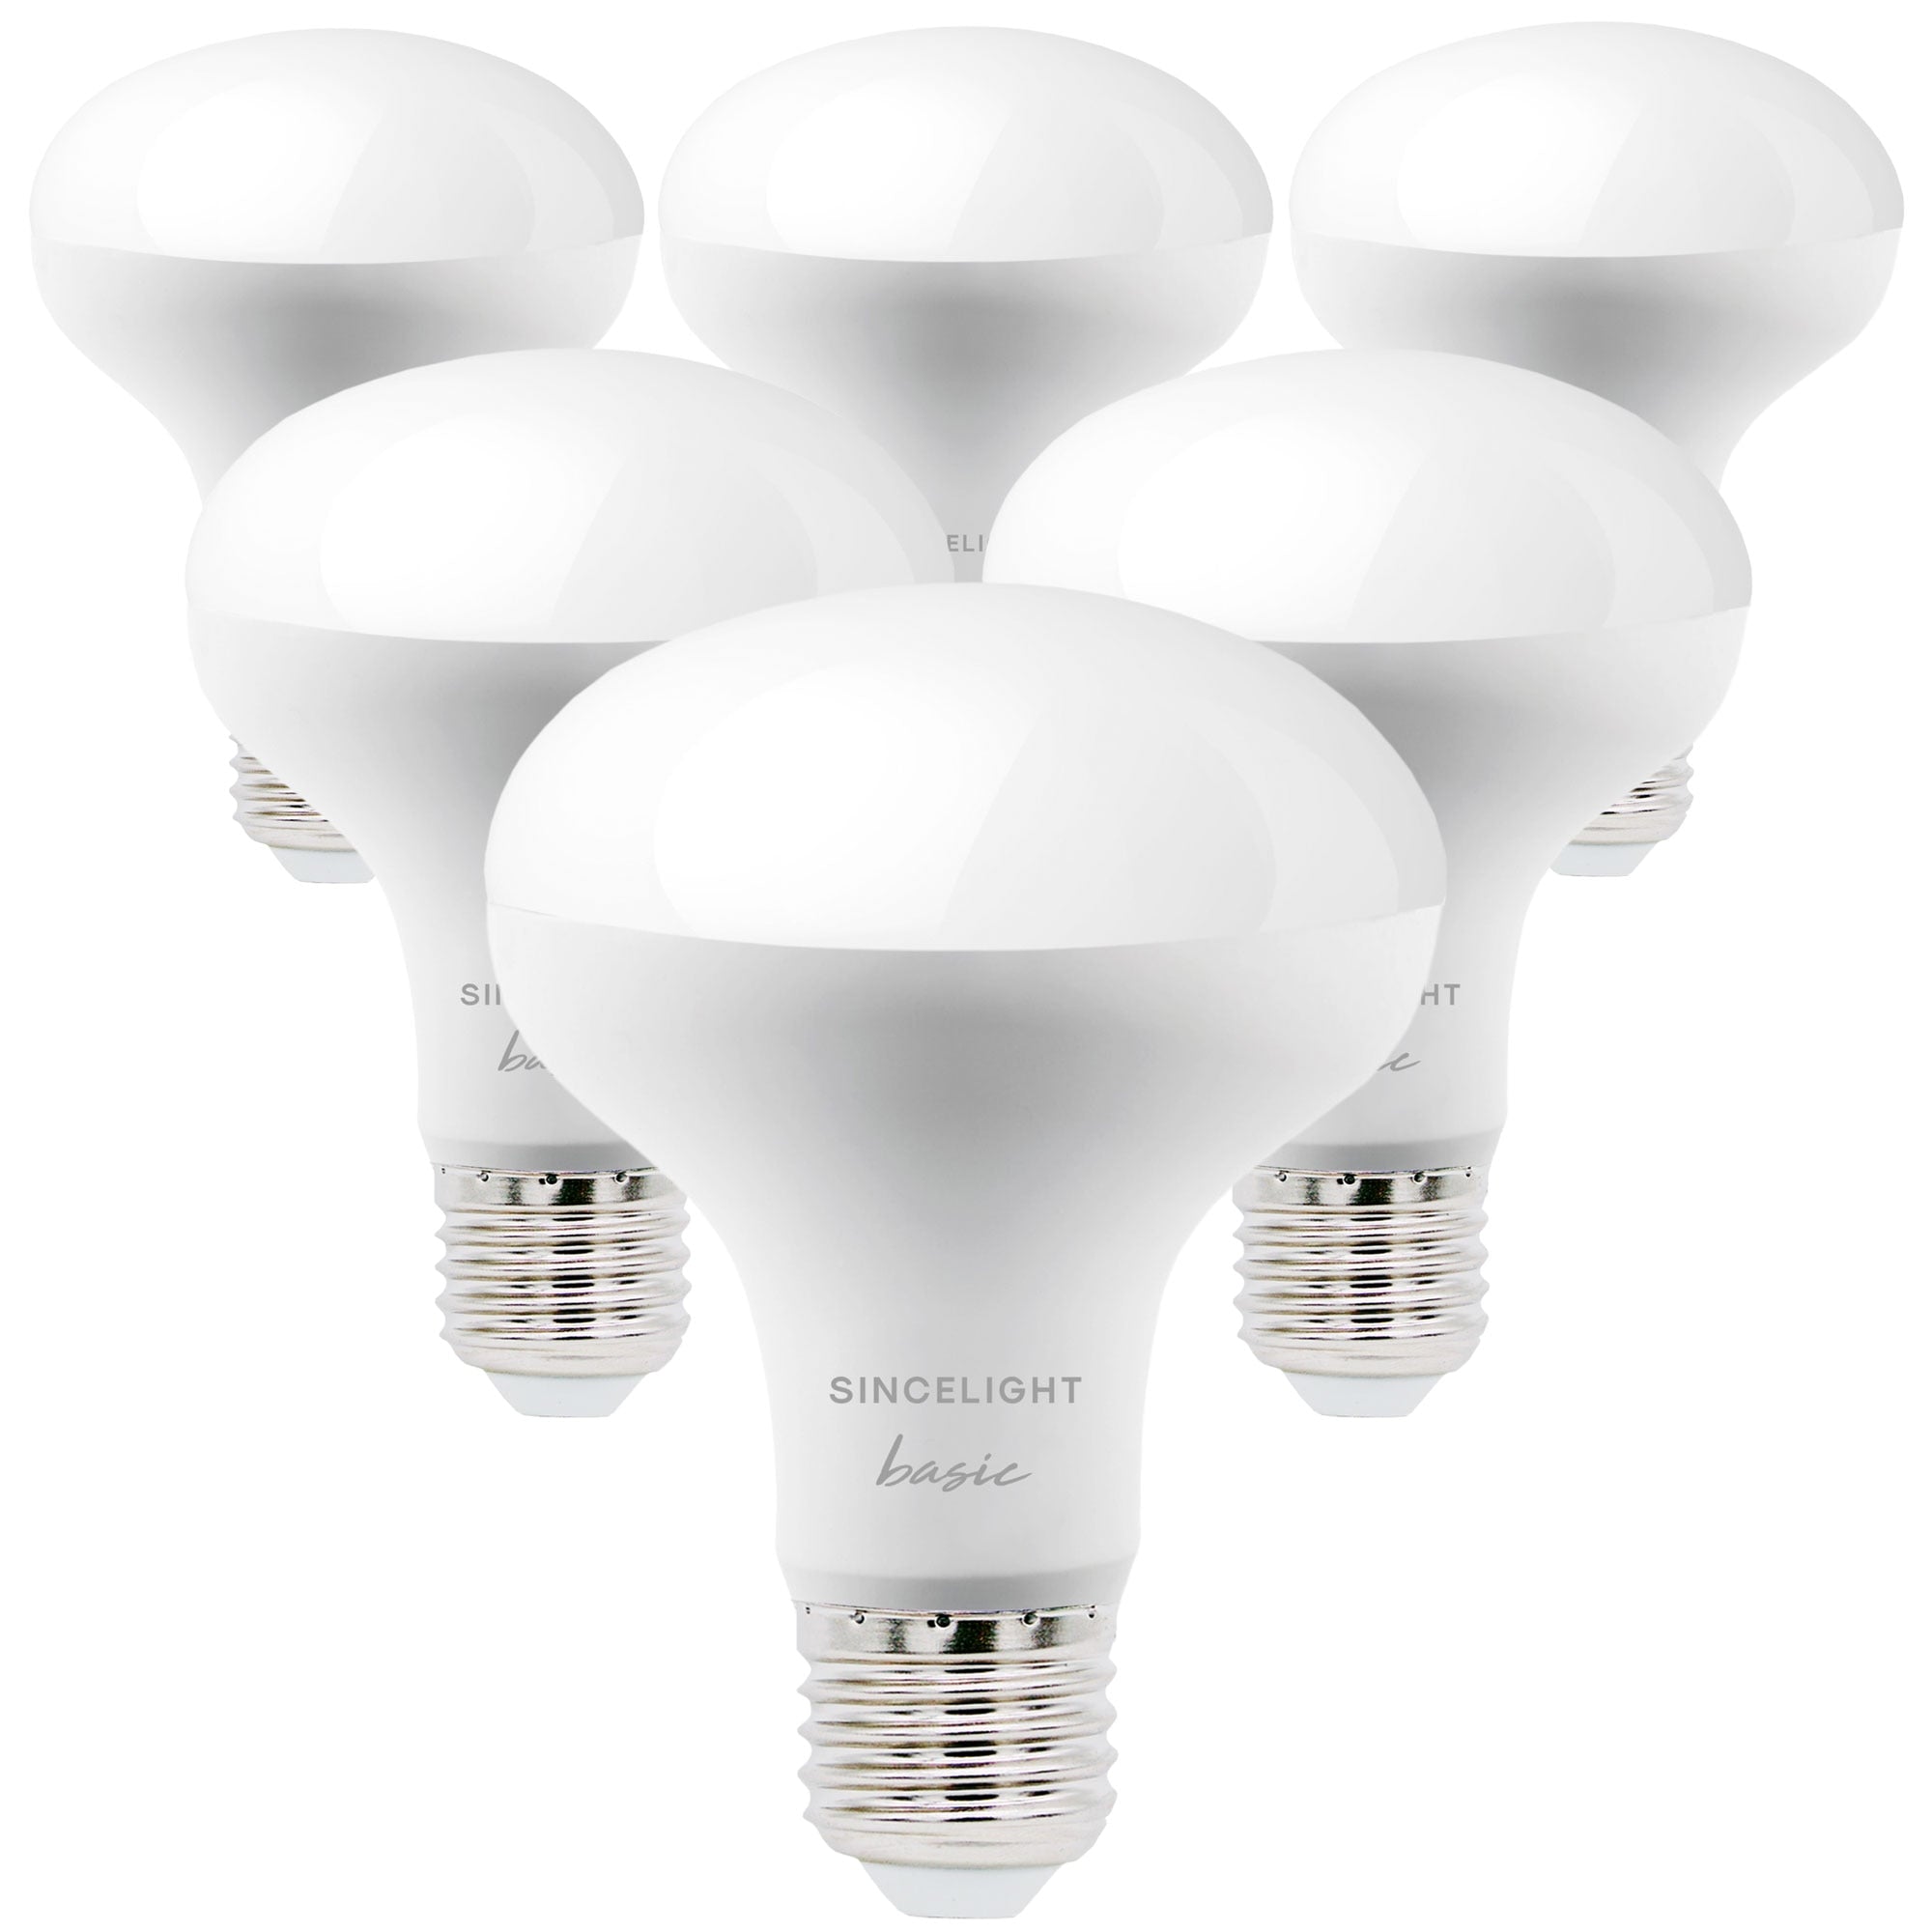 E27 LED Reflector Light Bulb with 9W,2700K,4000K（R80/120° Beam Angle/Non-Dimmable/Spotlight Bulb/Downlights)Pack of 6